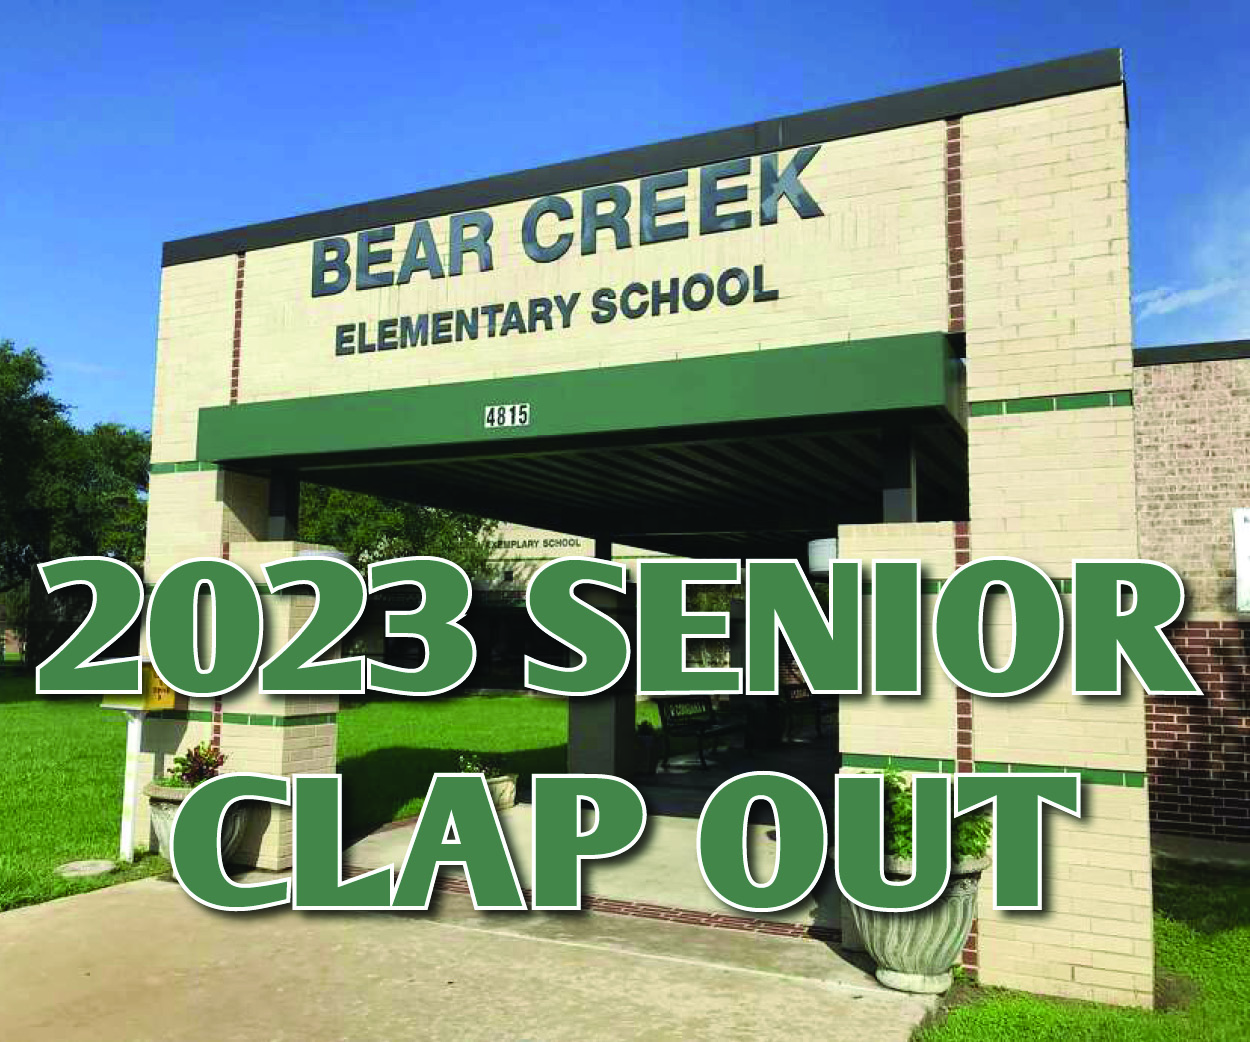 Bear Creek Elementary Senior Clap Out - May 17th